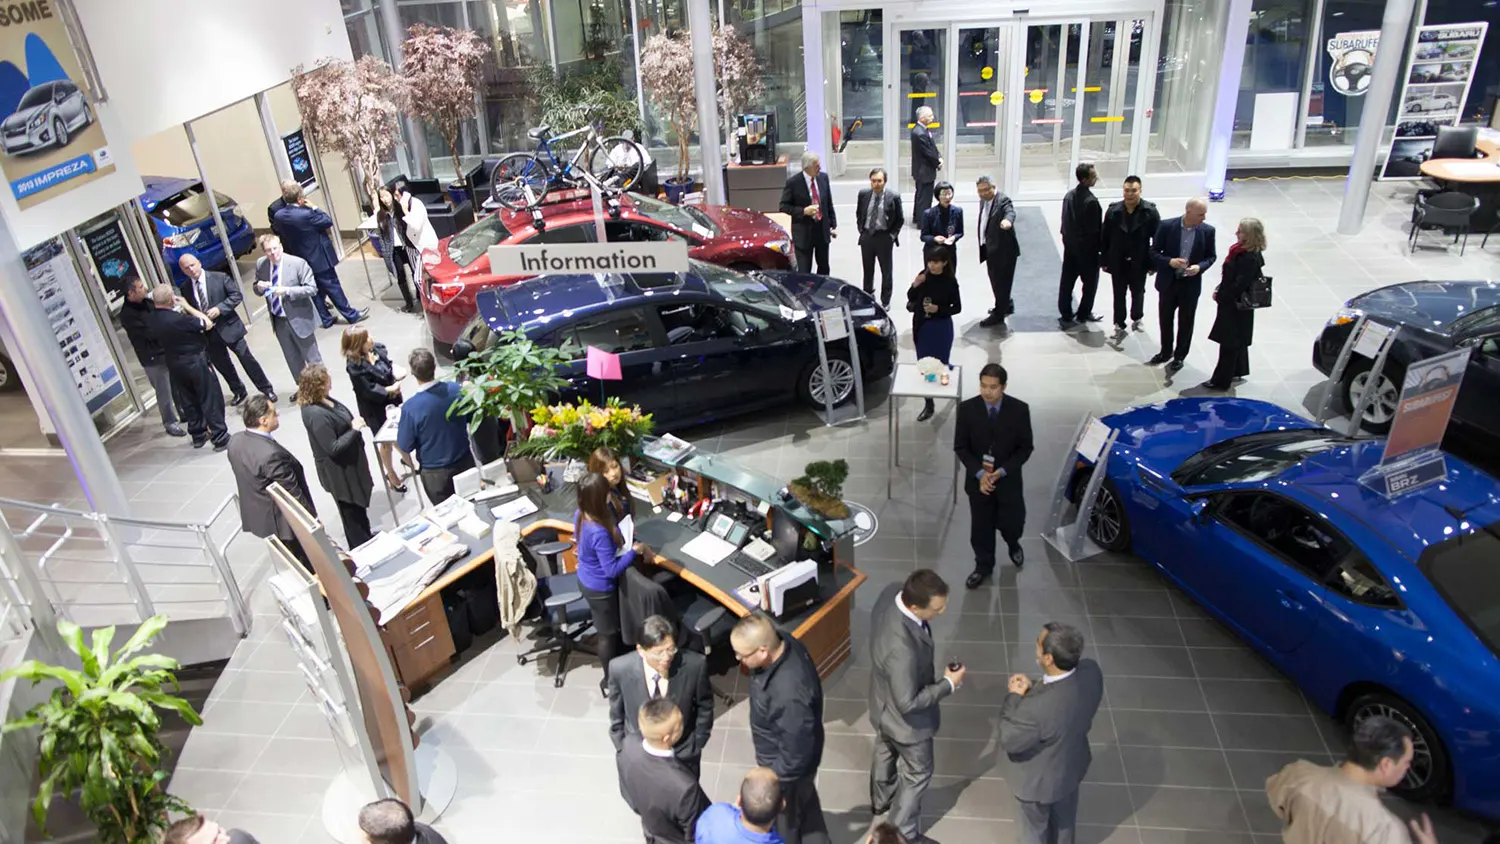 Digital marketing project for Willowdale Subaru. Planned and executed client promotions event